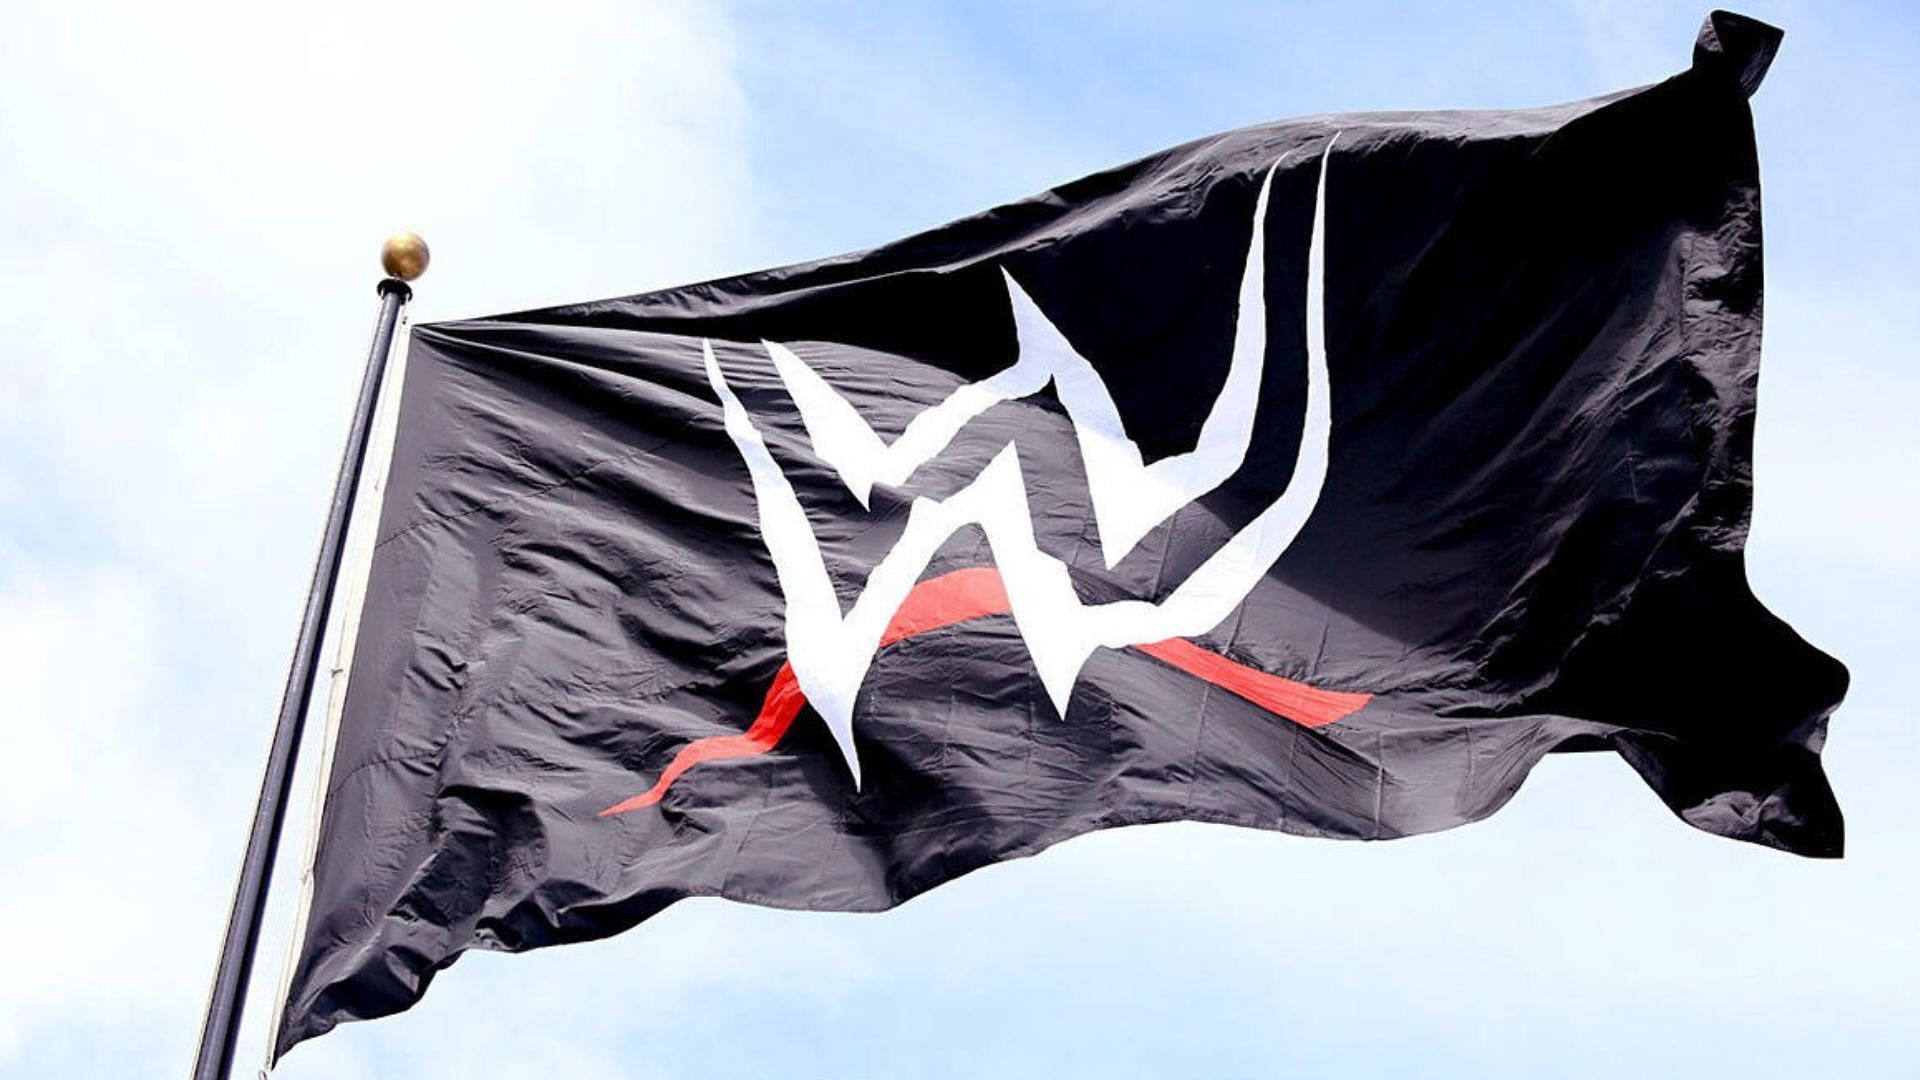 WWE has witnessed several changes since Endeavor Group purchased the company in 2023